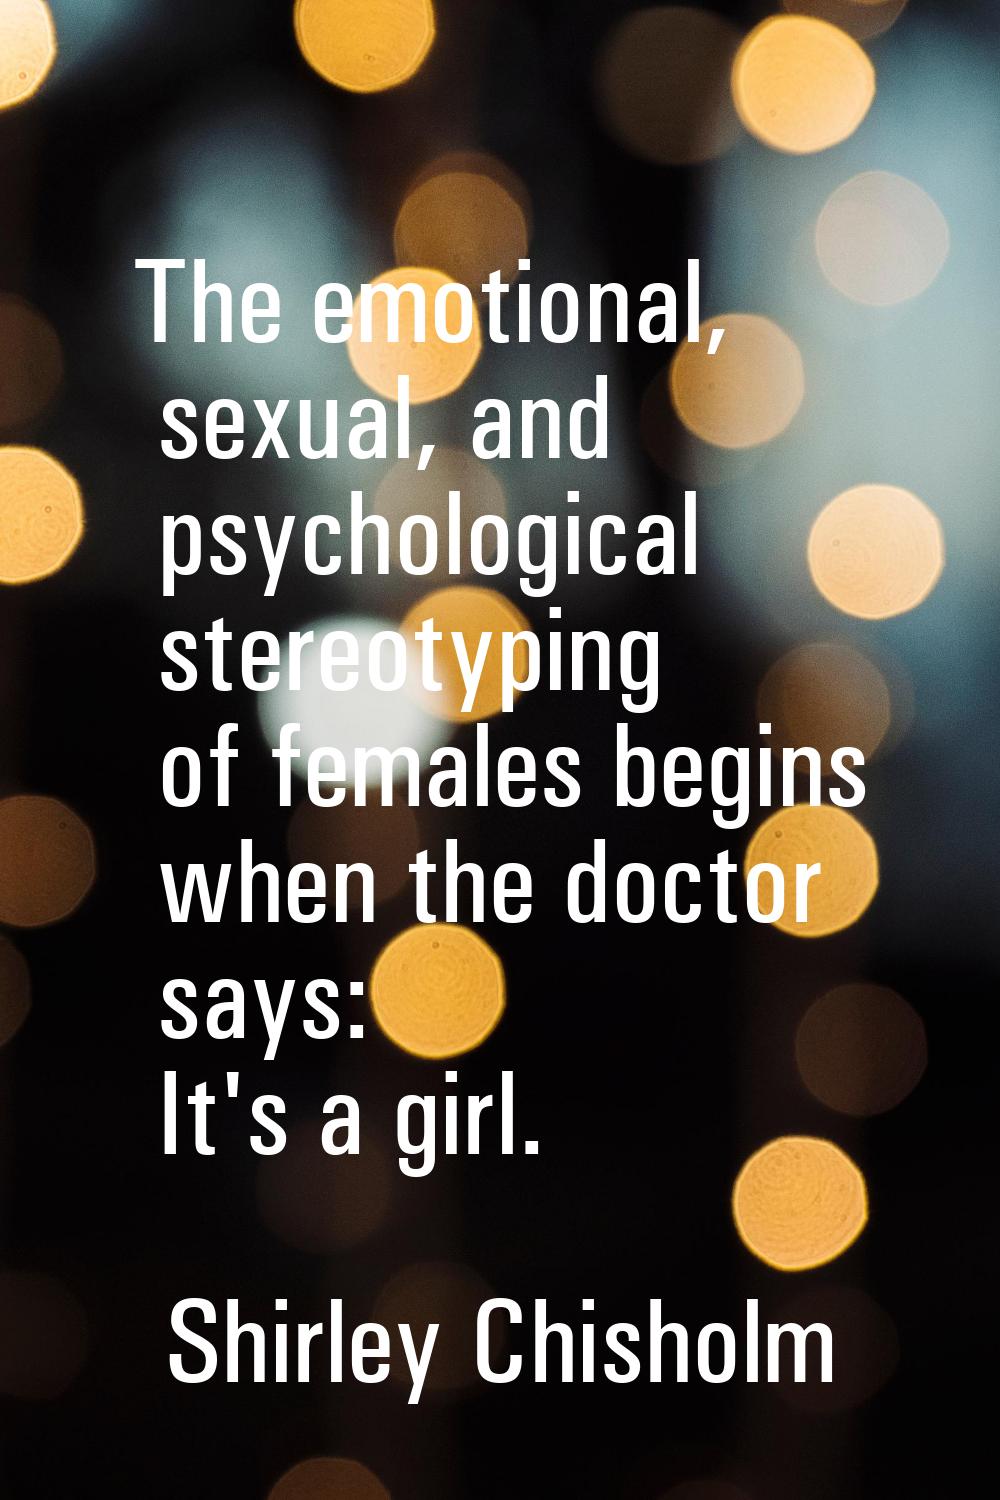 The emotional, sexual, and psychological stereotyping of females begins when the doctor says: It's 